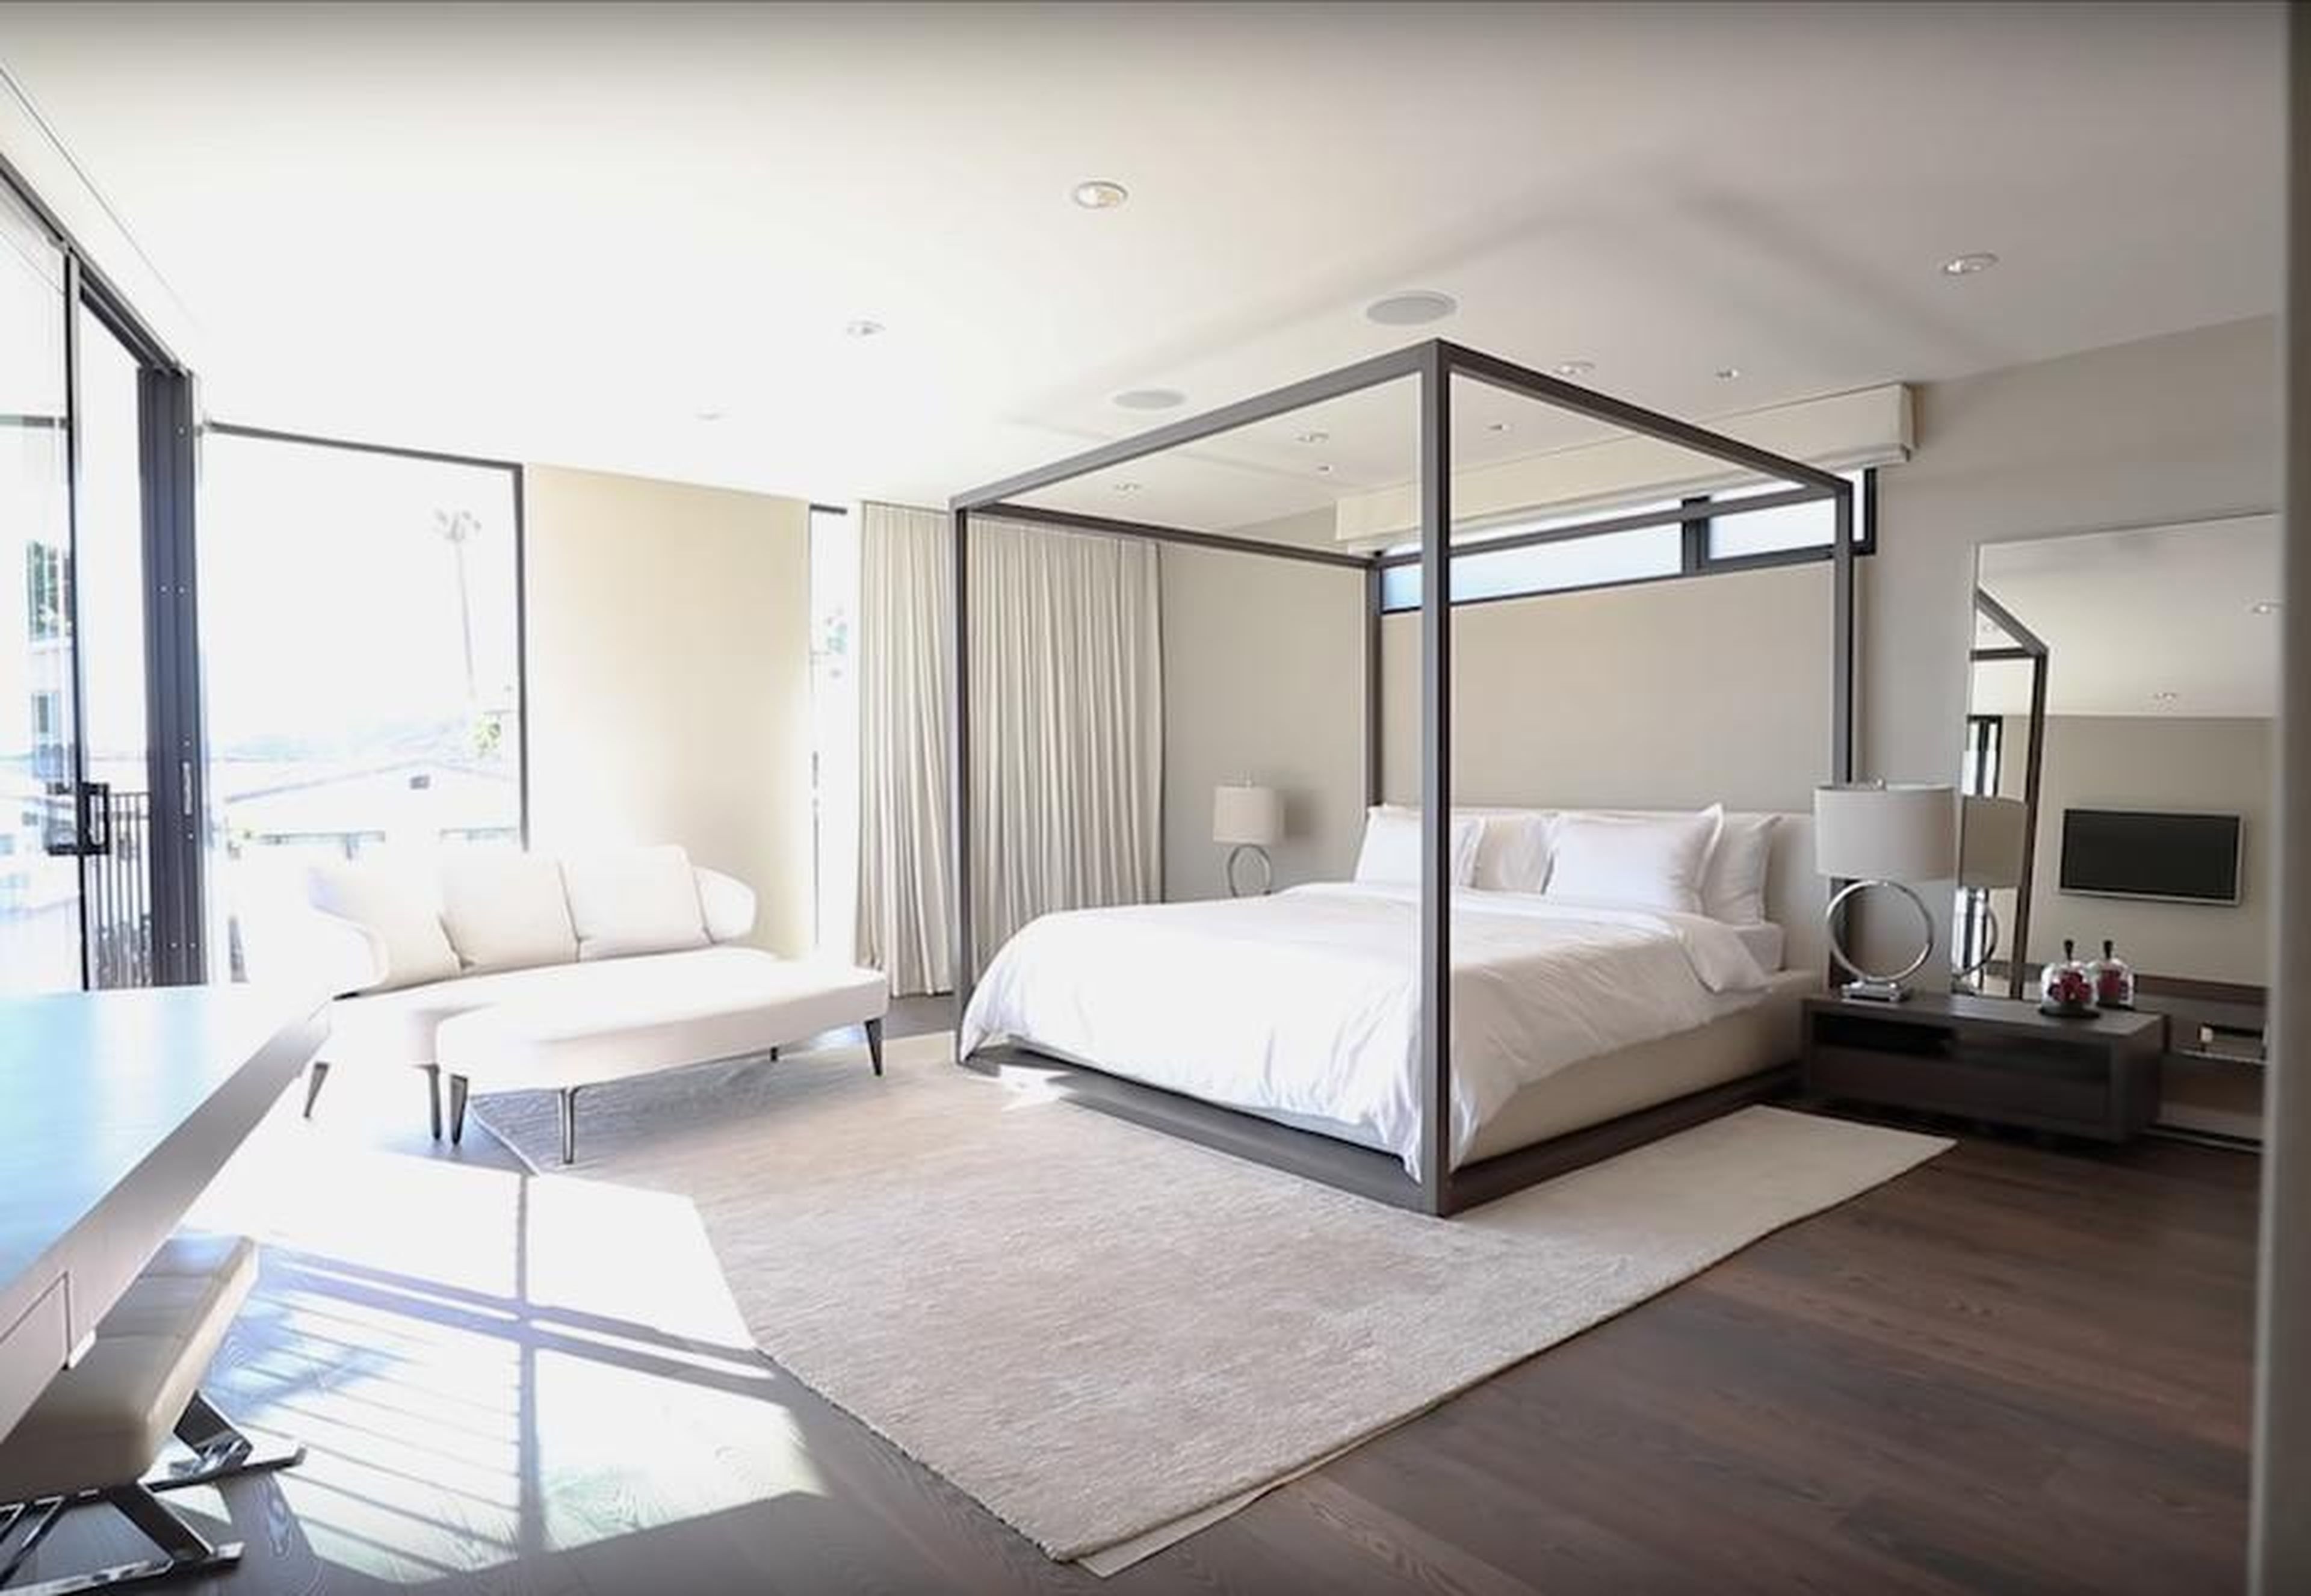 The second-floor master bedroom is just as sun-drenched as the rest of the house, with a massive walk-in closet.